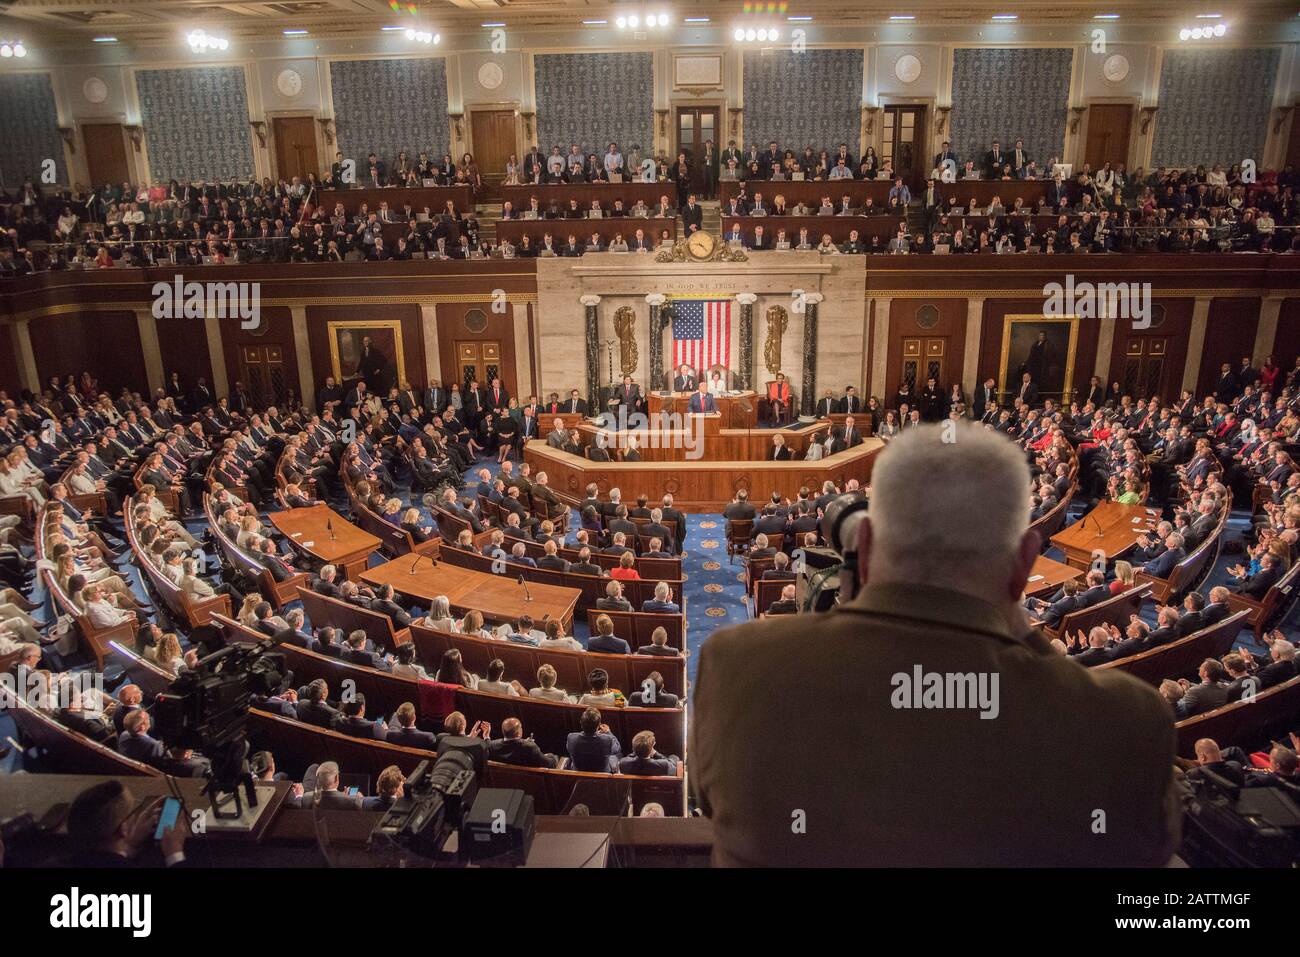 Washington DC,  February 4 2020-President Donald J. Trump gives his third State of the Union address to the combined Members of the House of Represent Stock Photo